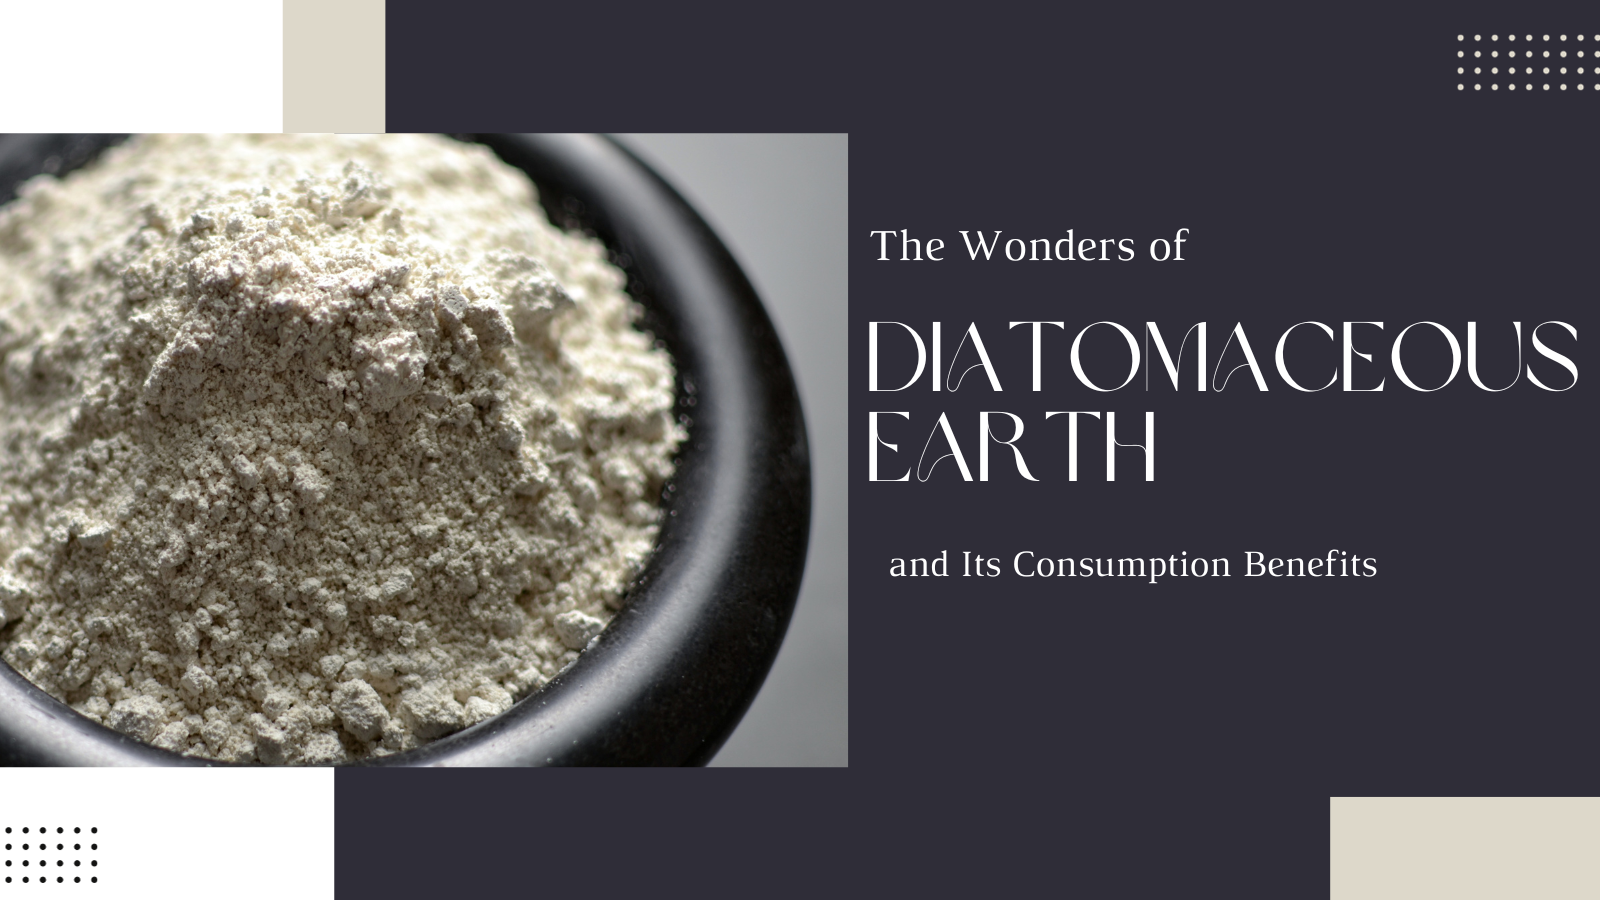 The Wonders of Diatomaceous Earth and Its Consumption Benefits